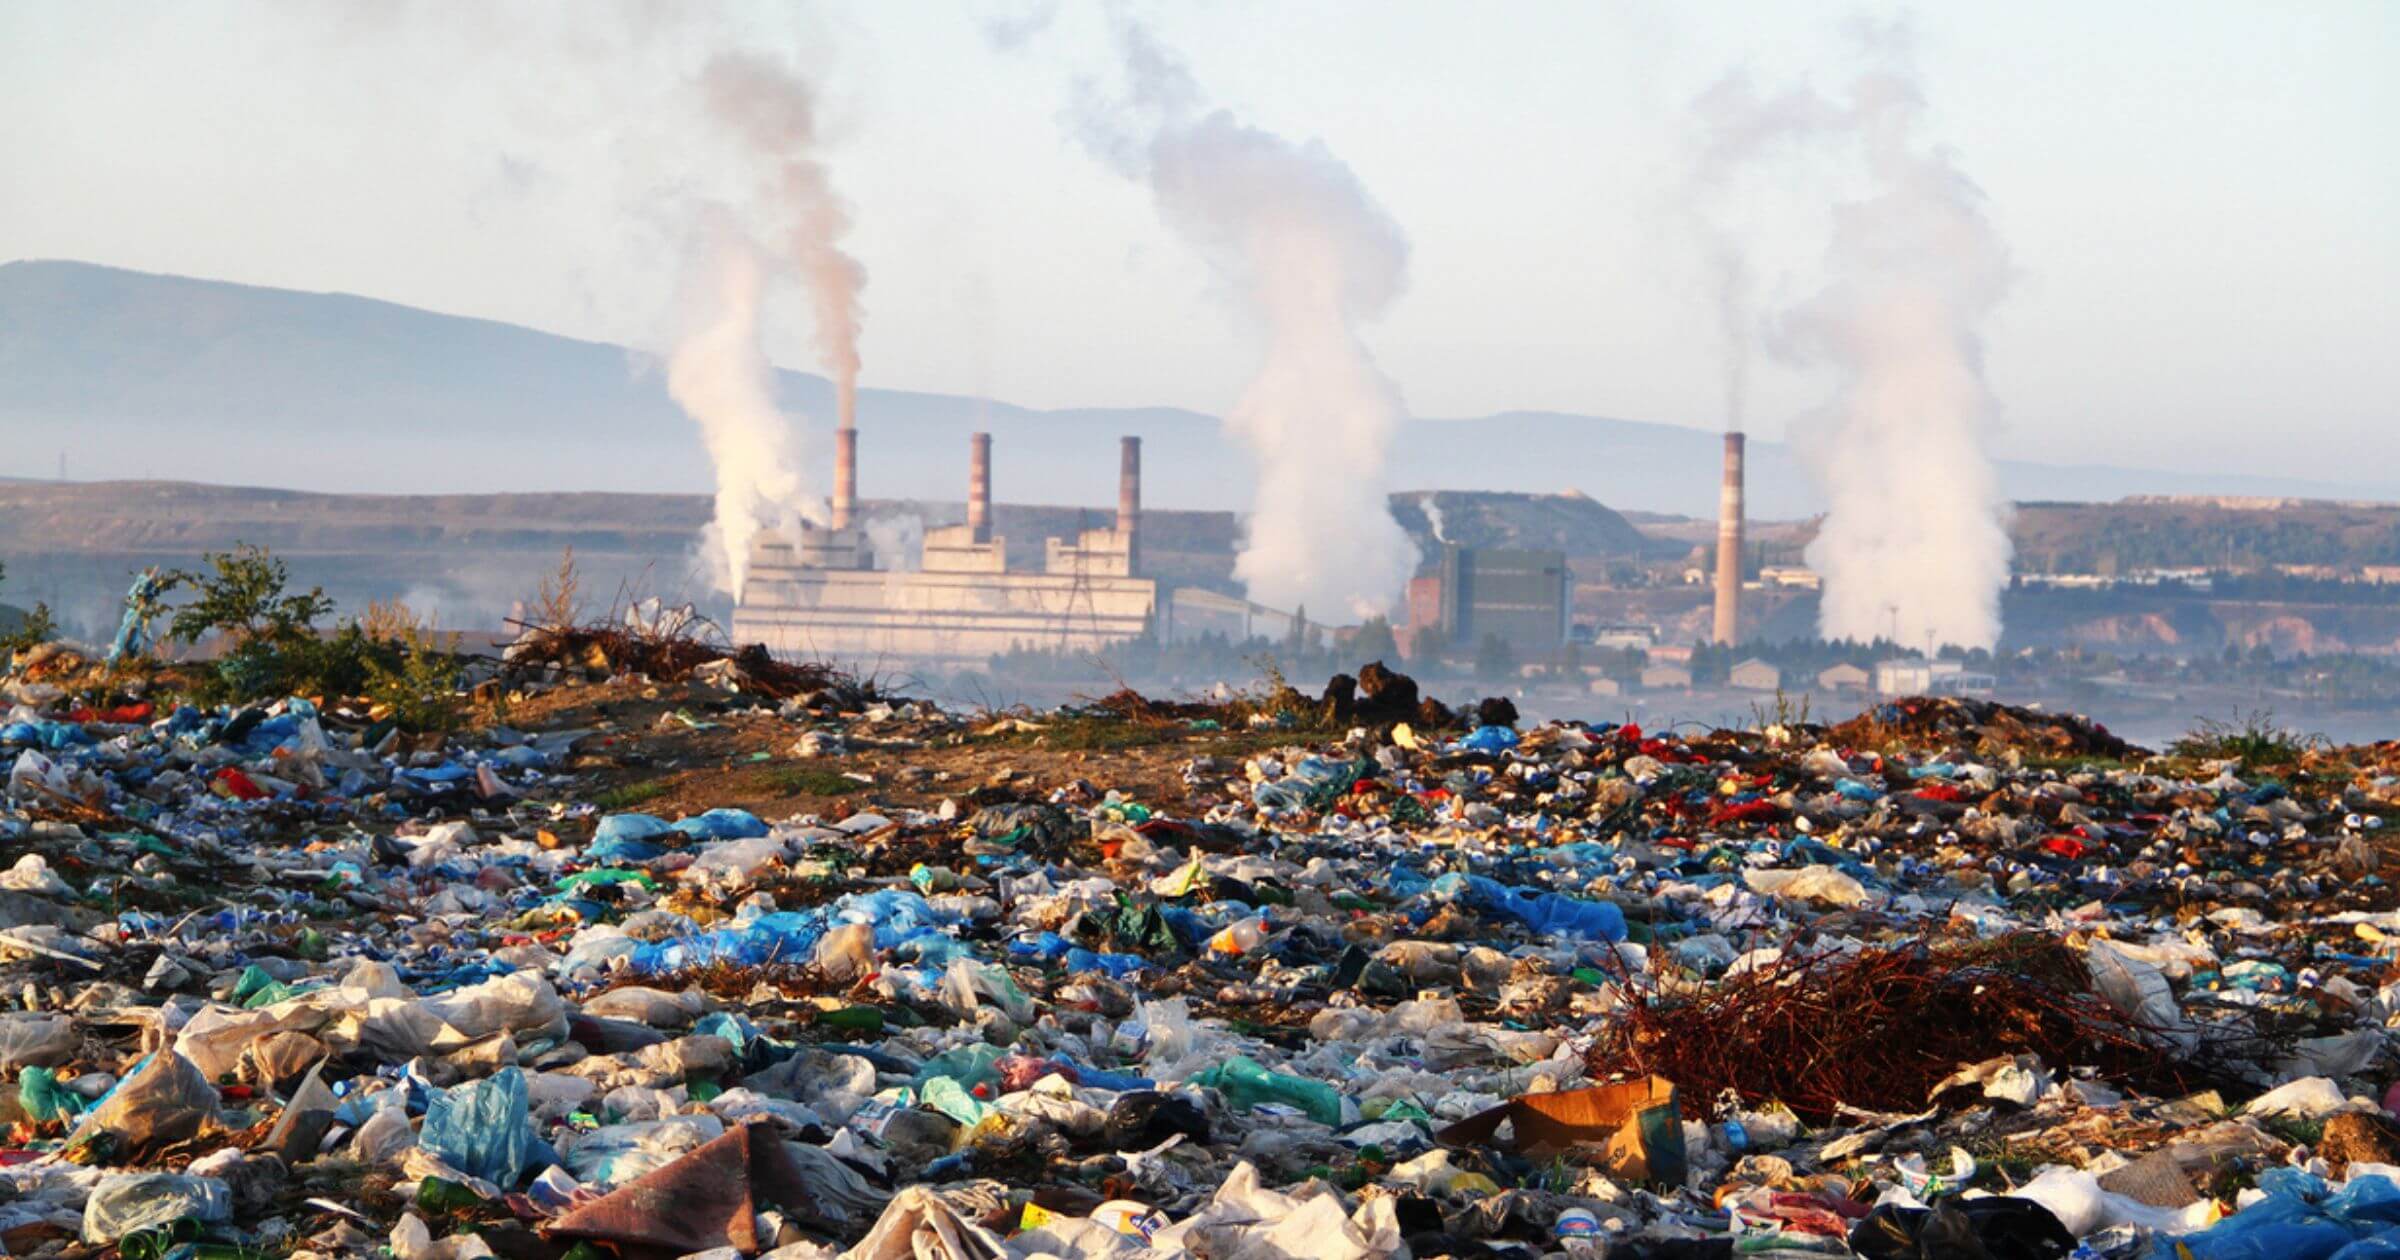 A view of plastic waste littered in open environment with factories polluting the atmosphere in the background